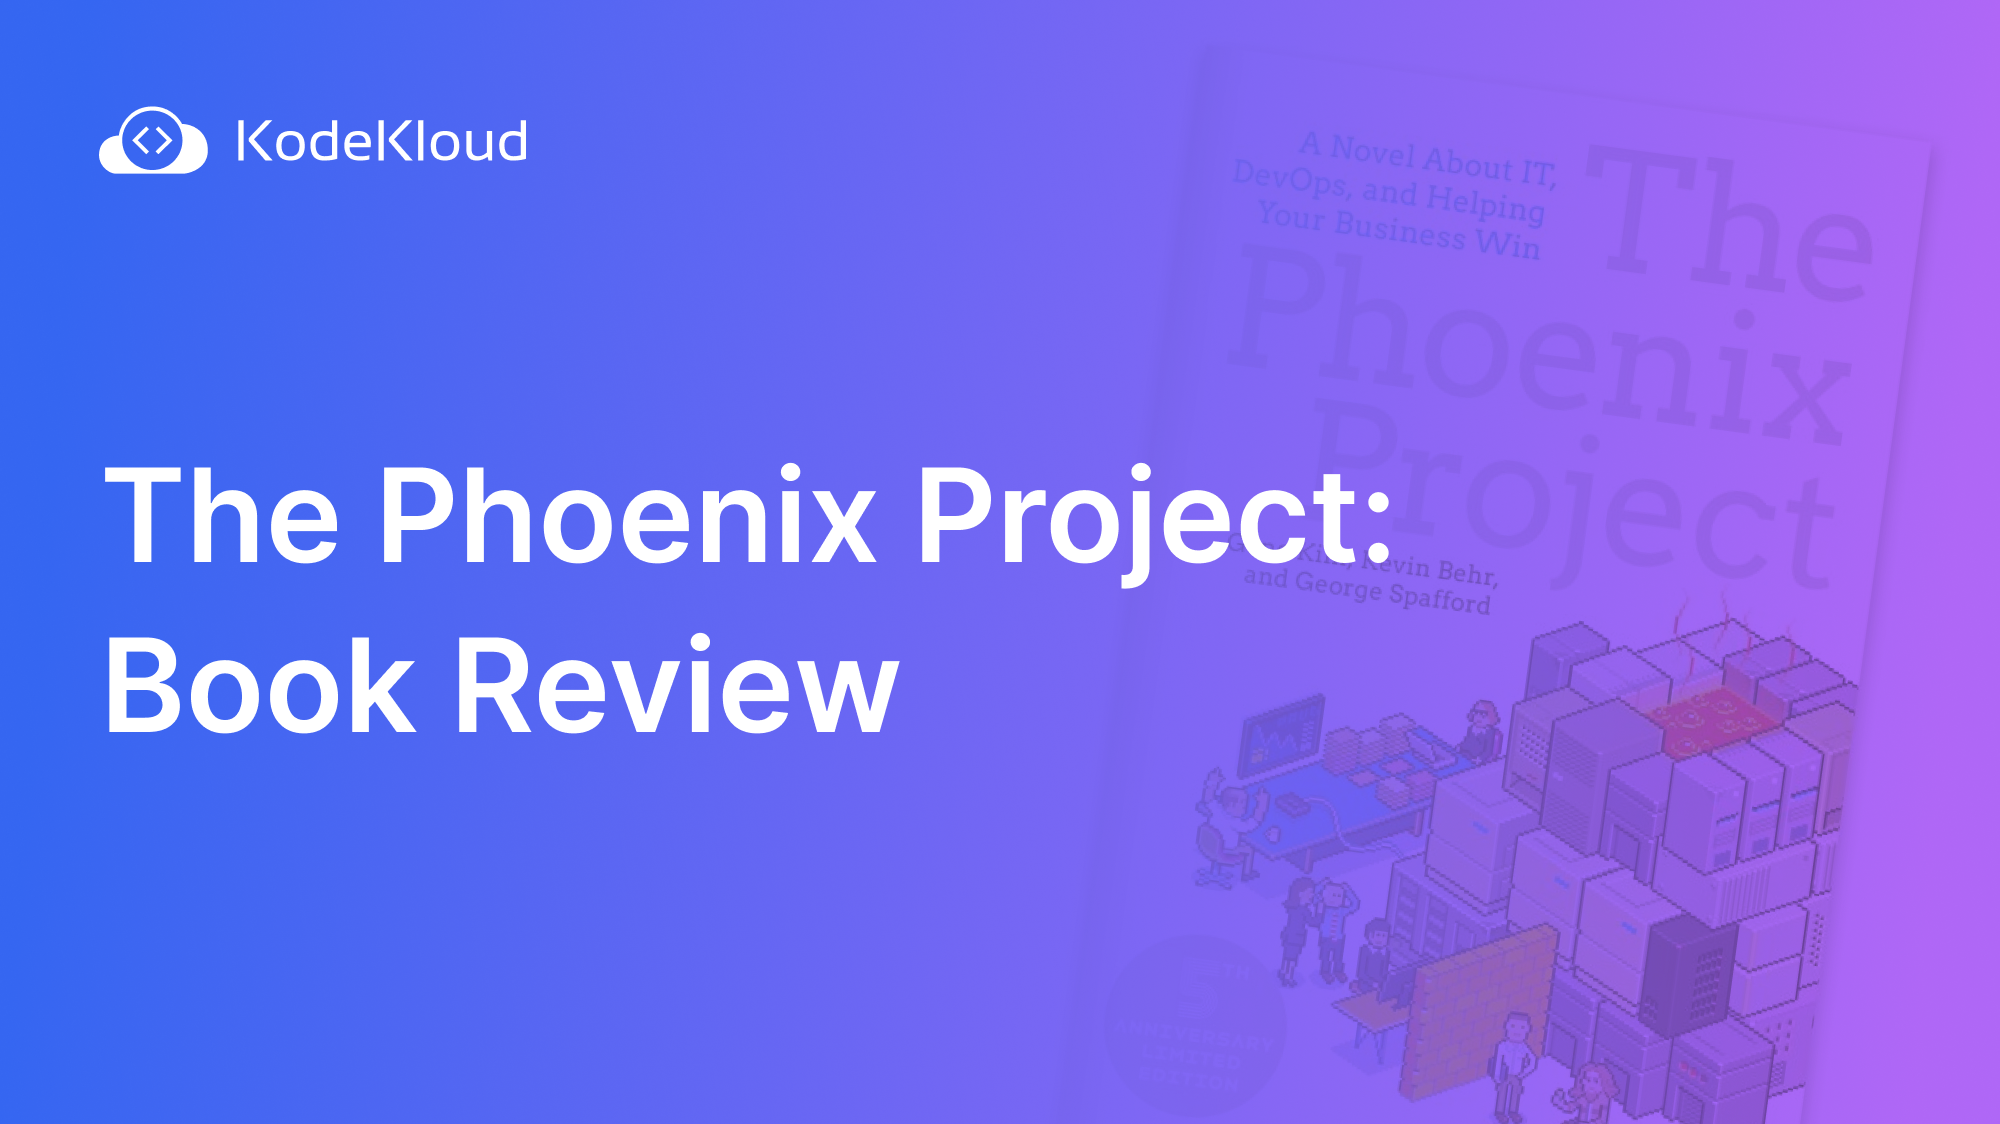 The Phoenix Project: Book Review